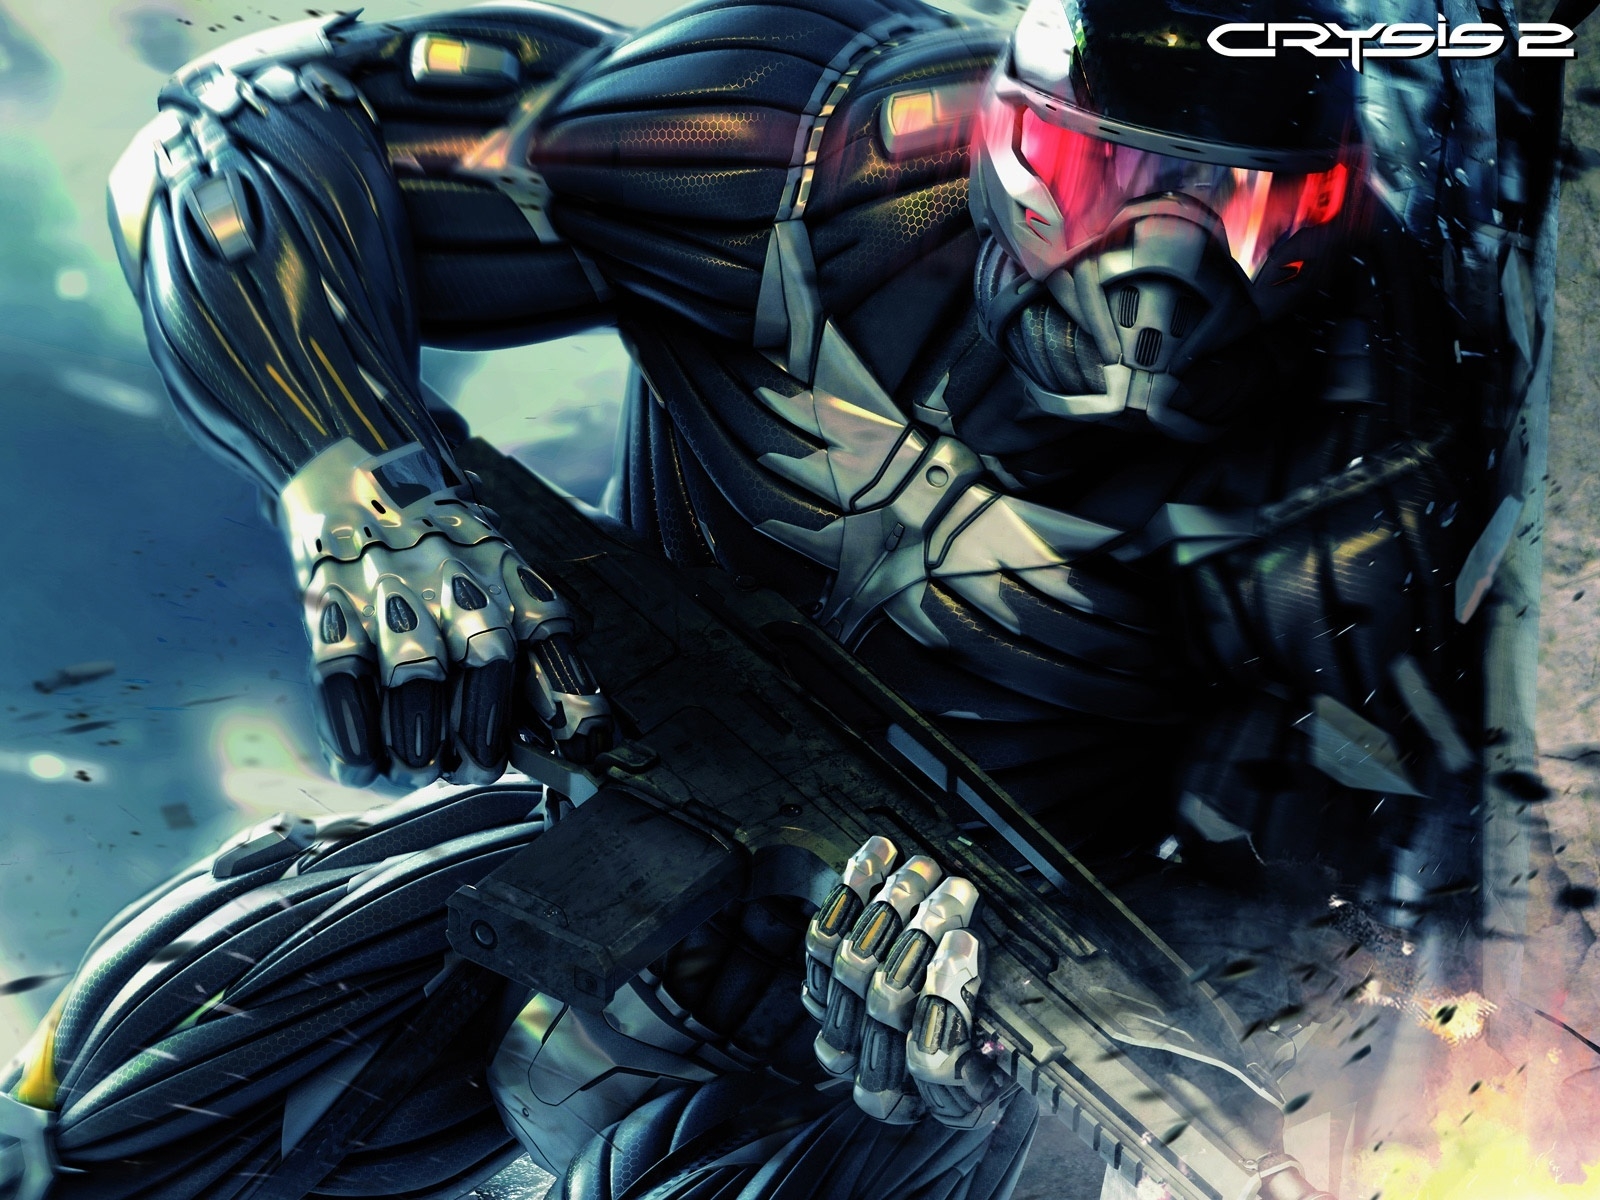 Crysis 2 for 1600 x 1200 resolution